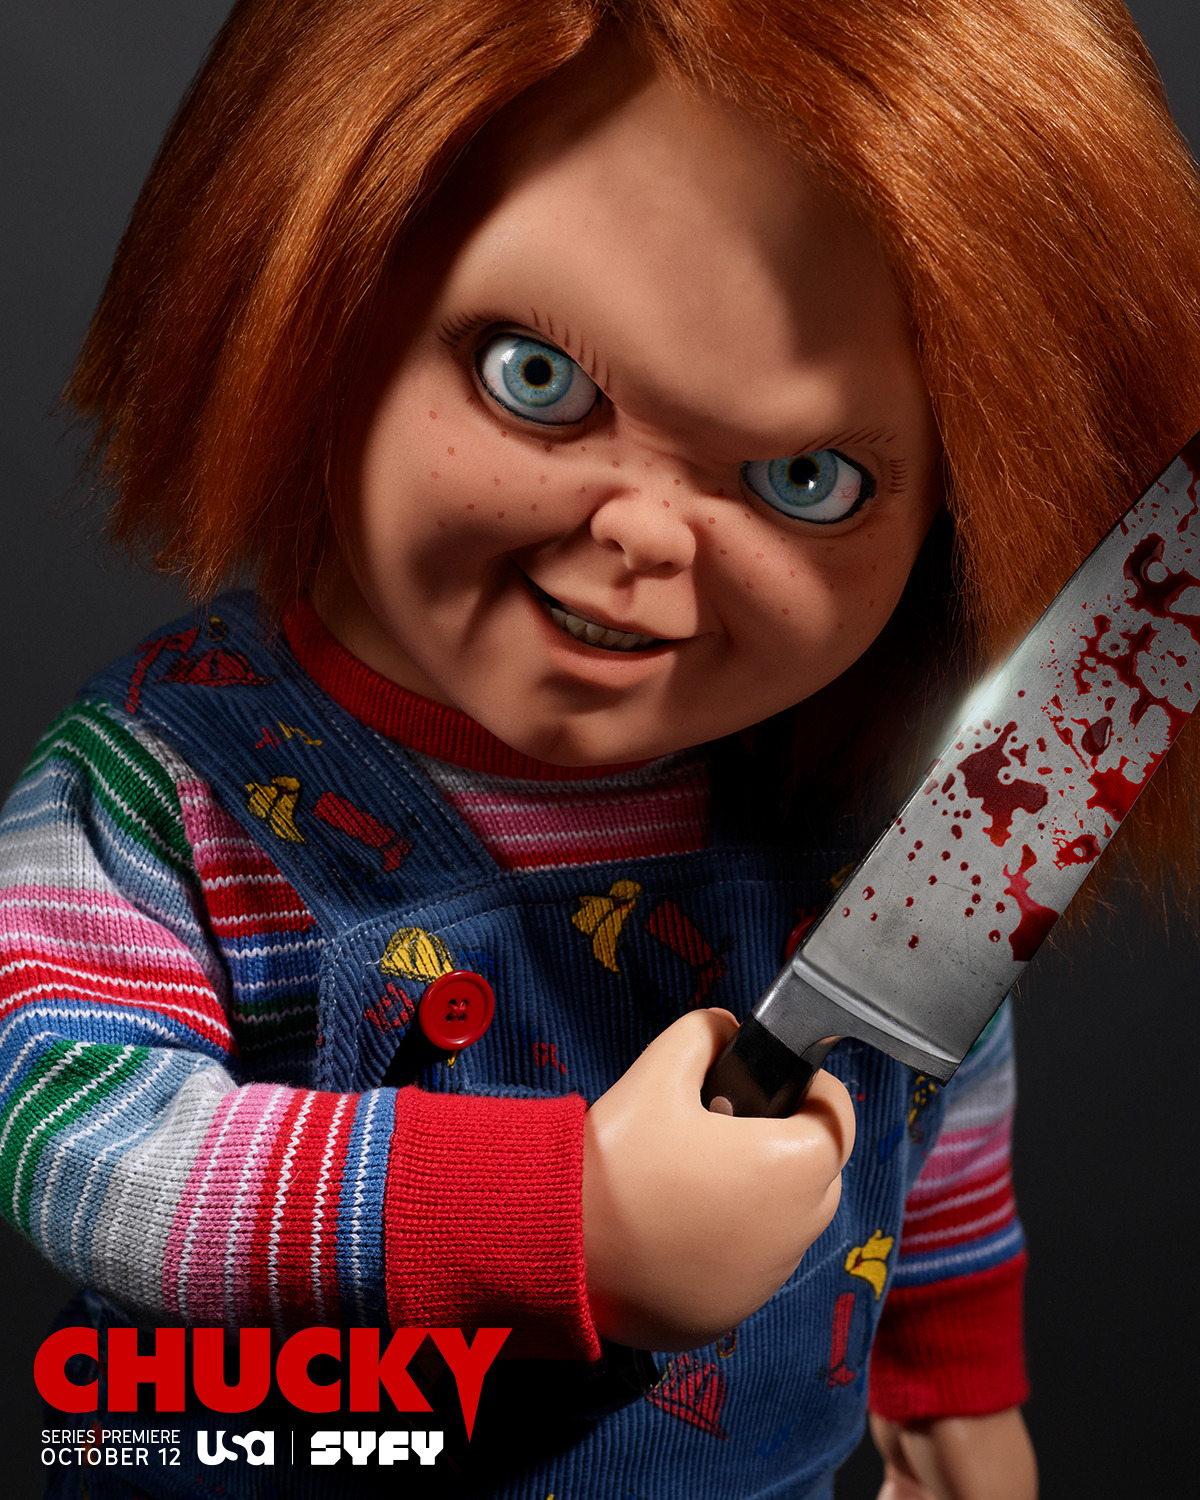 Extra Large Movie Poster Image for Chucky (#1 of 4)